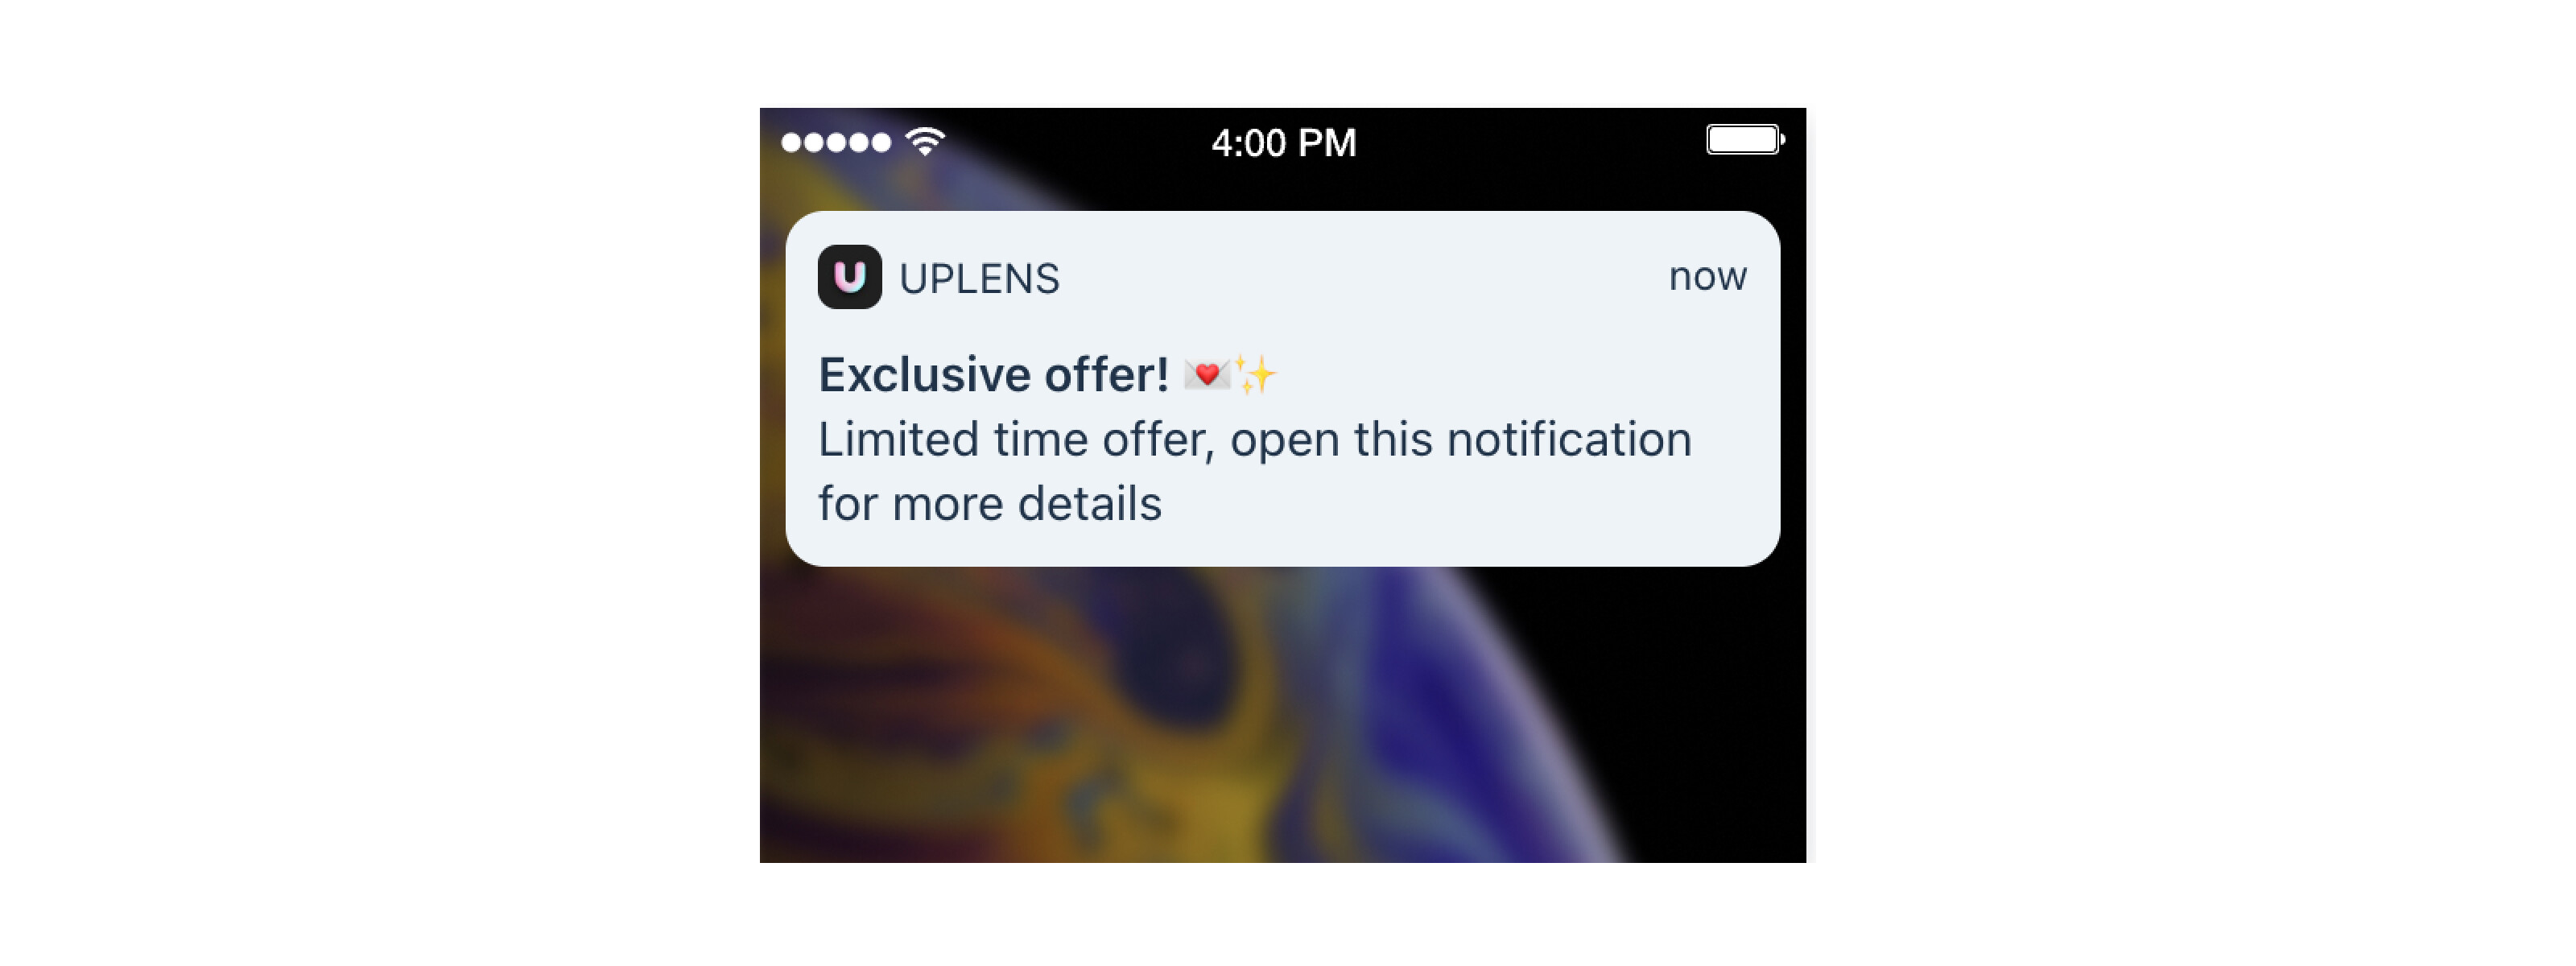 Uplens push notification created in Apphud